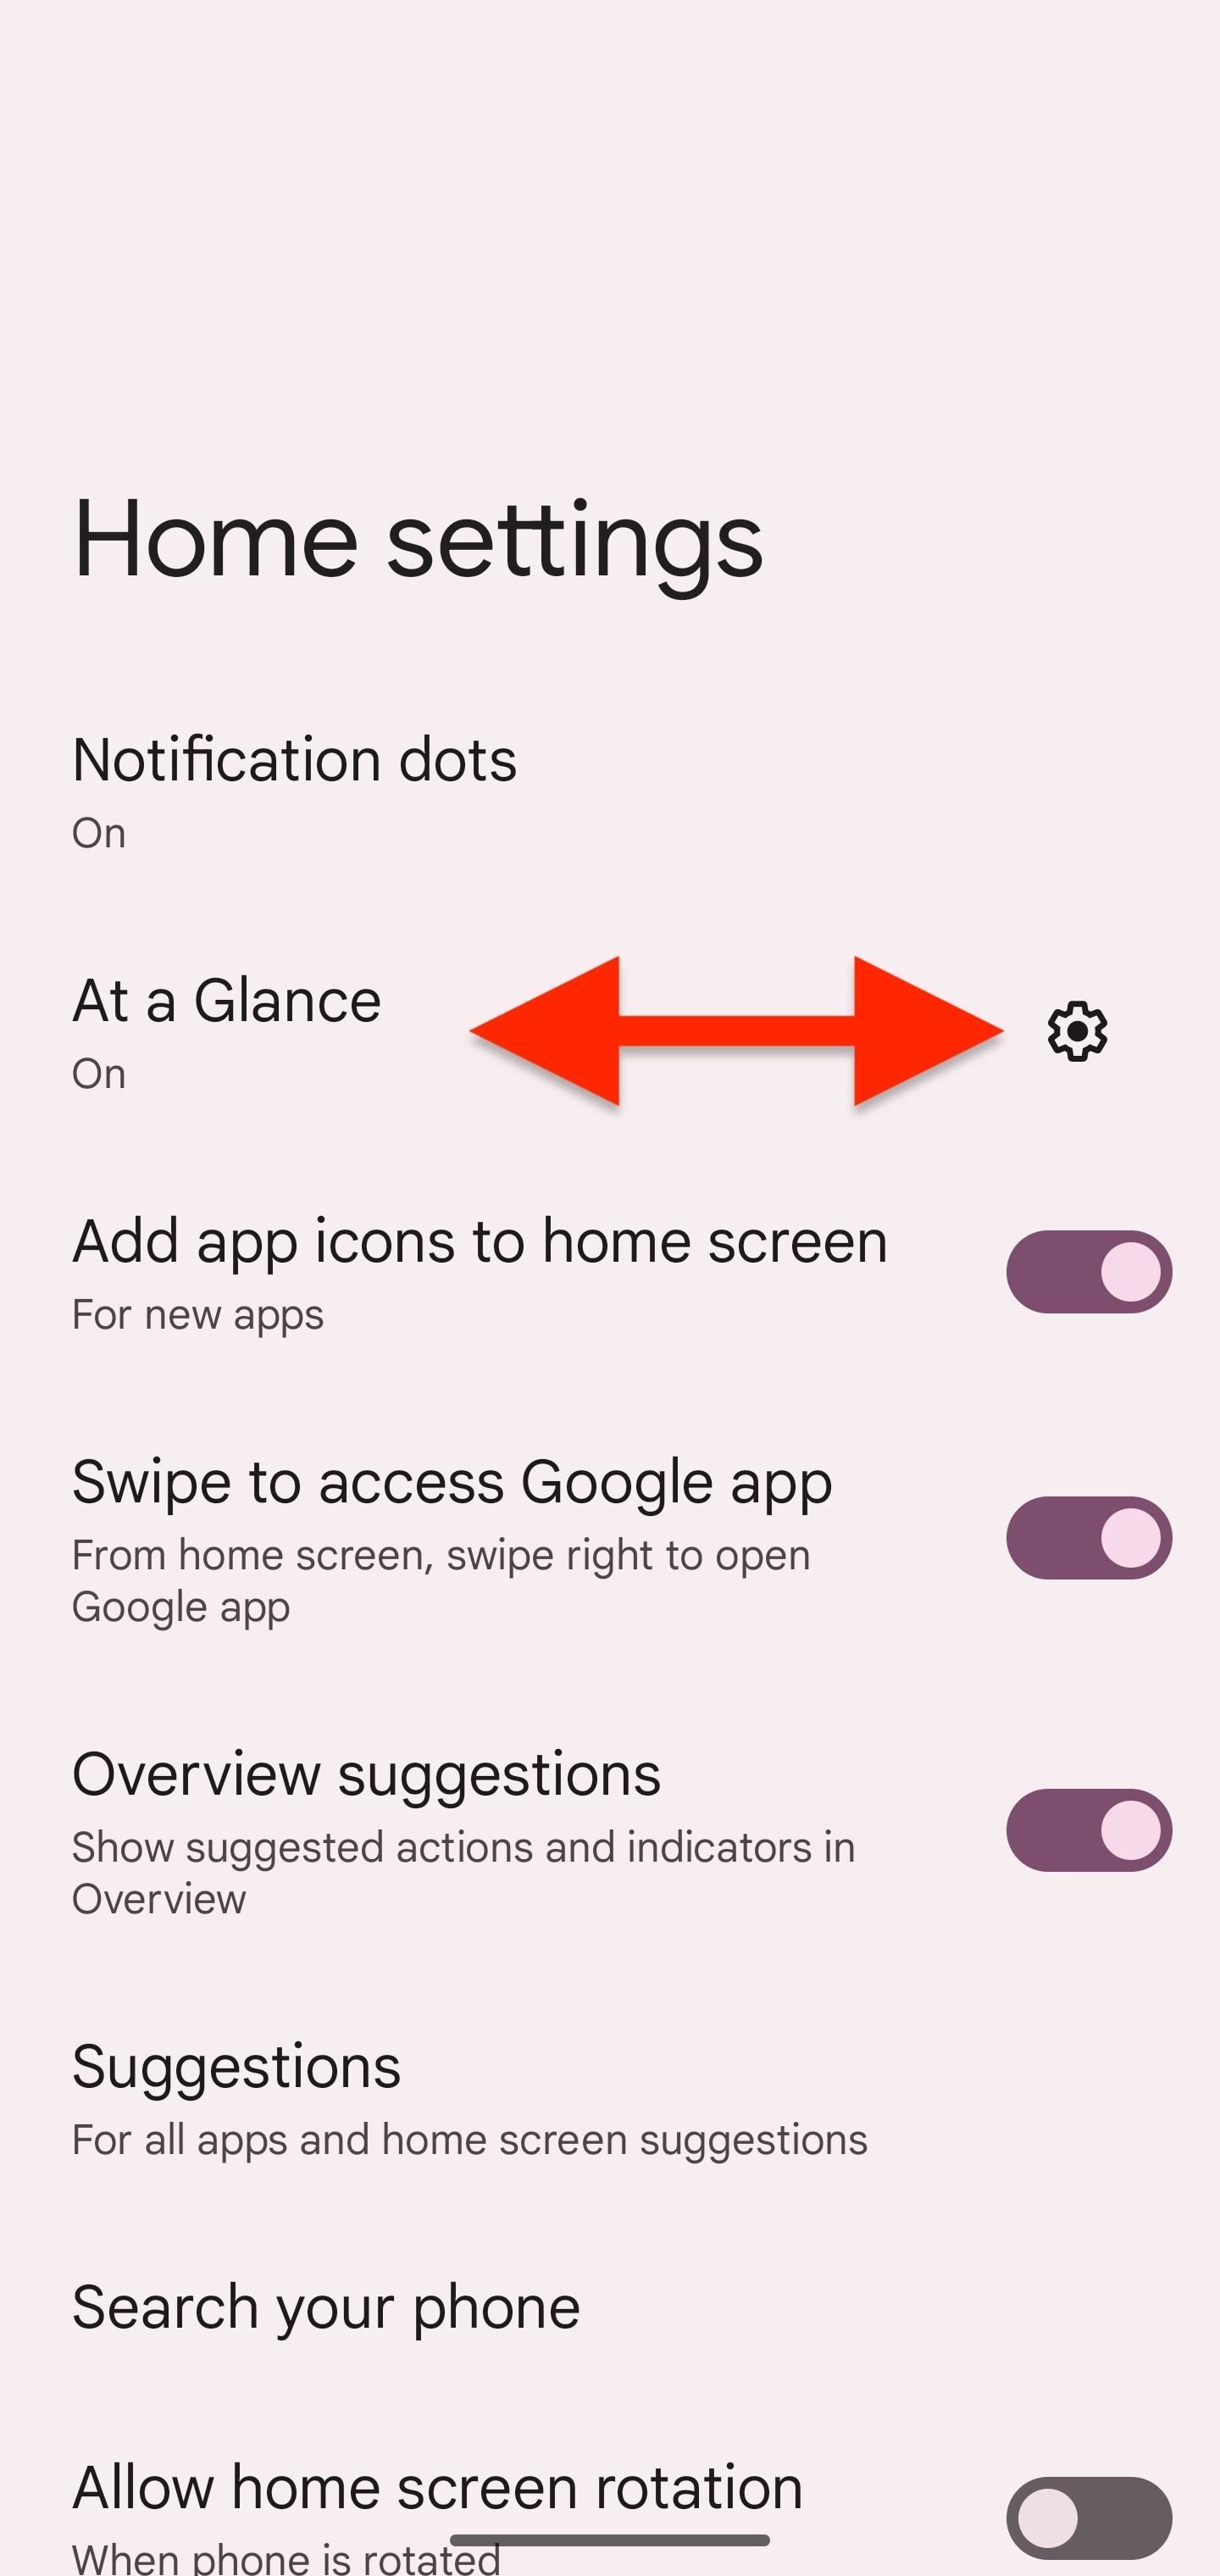 The Fastest Way to Toggle Your Pixel's Flashlight On/Off — Even When Your Screen Is Locked